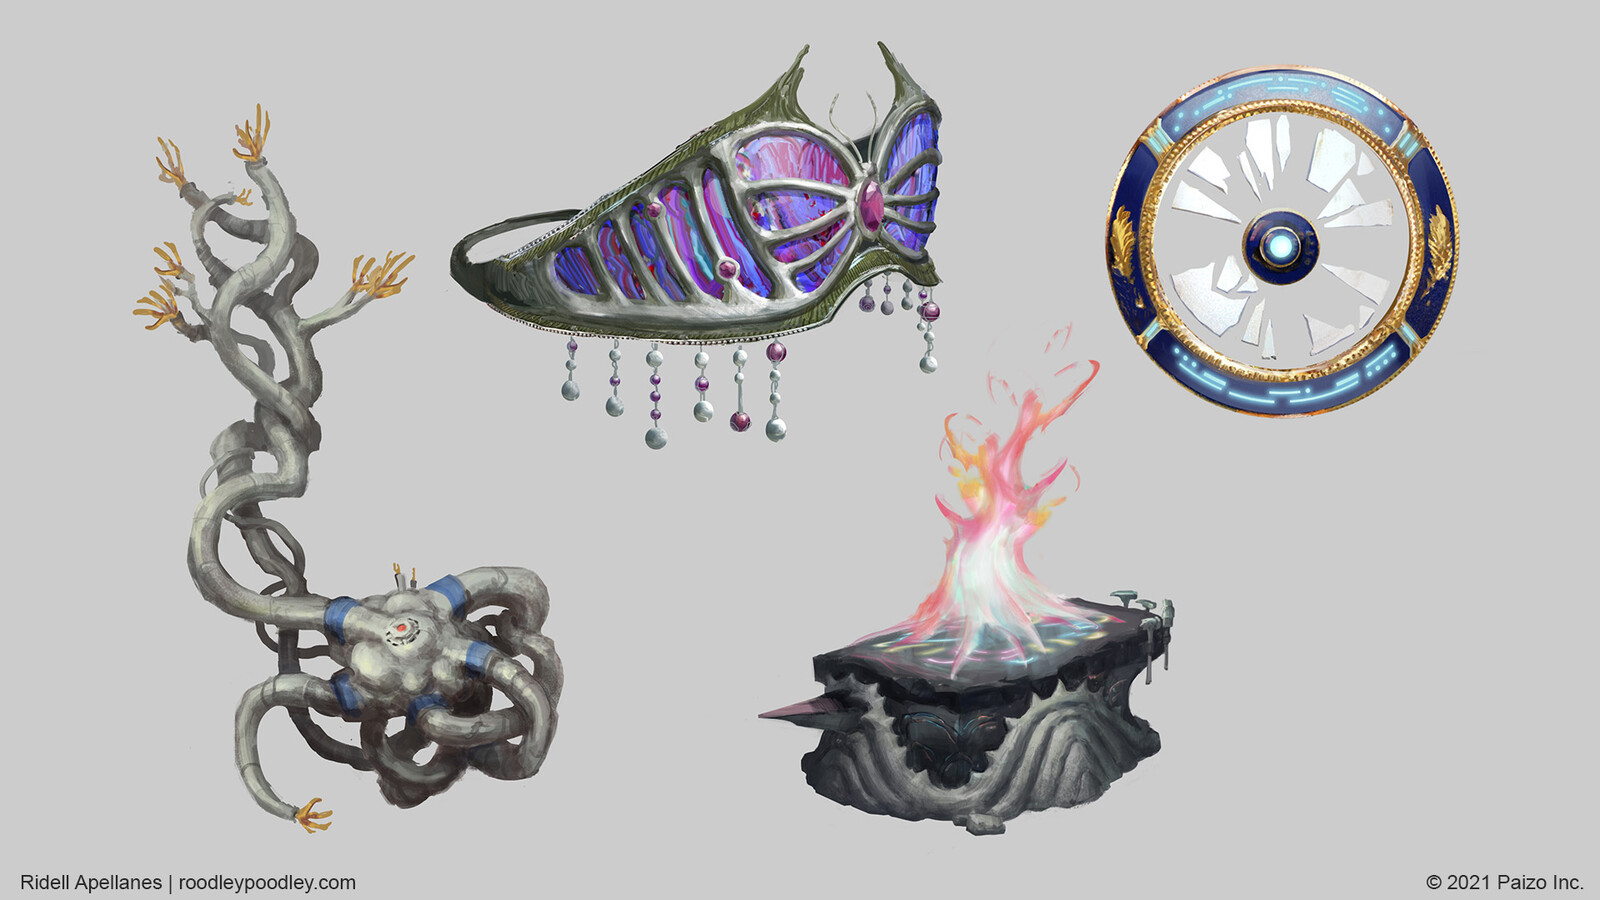 Final Images - Everlength Rope, Diadem of Desna, Tytarian's Anvil, Gap Recollective Symbol